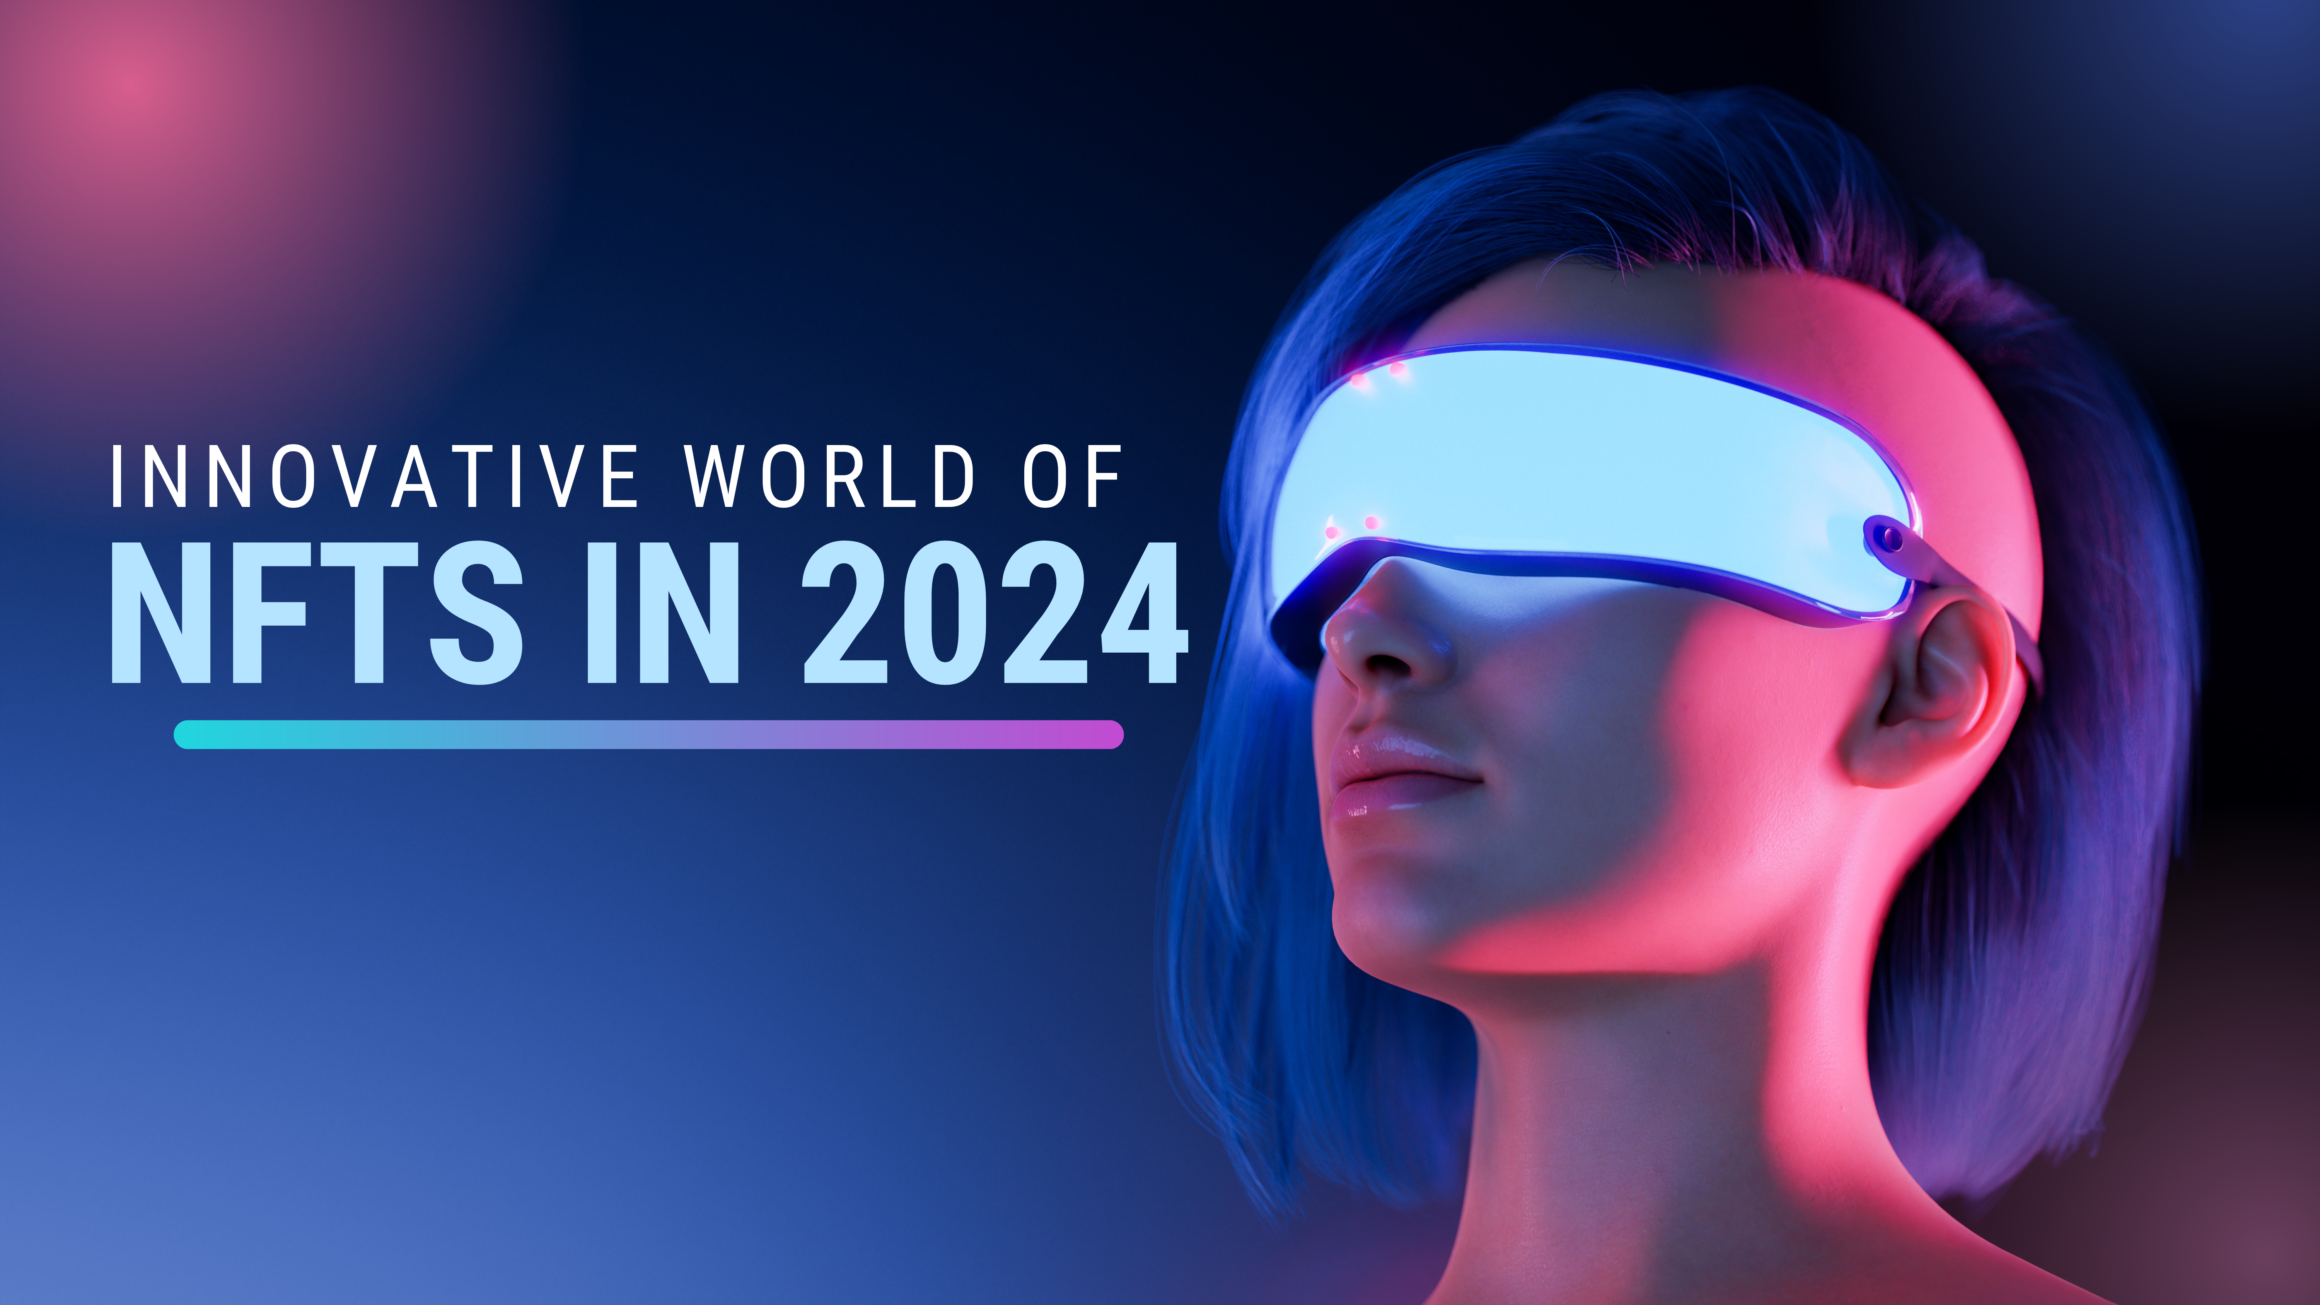 Innovative world of NFTs in 2024